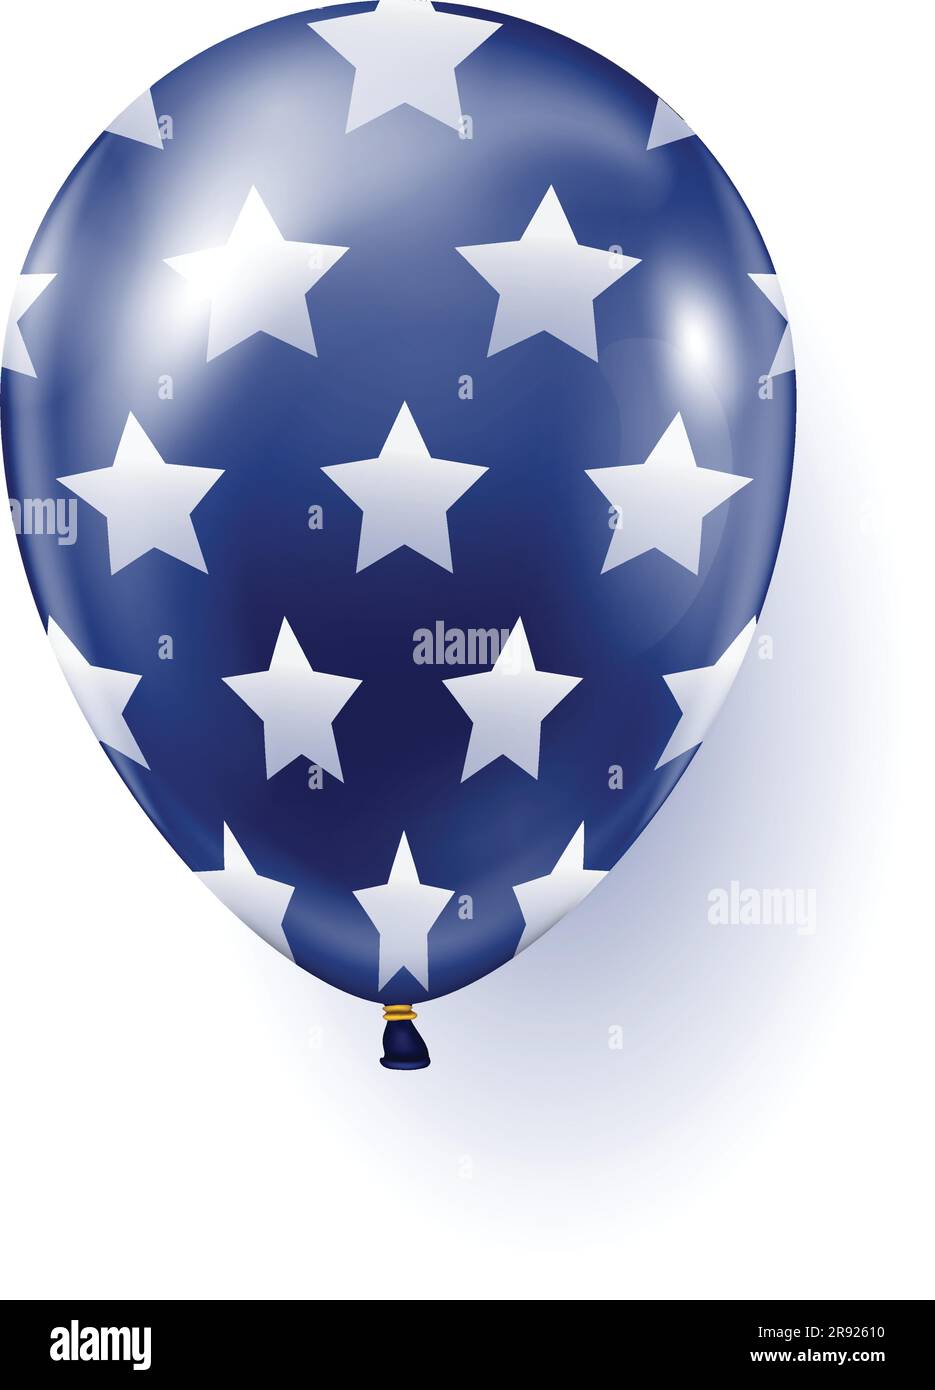 Blue hot air balloons with white stars. Stock Vector